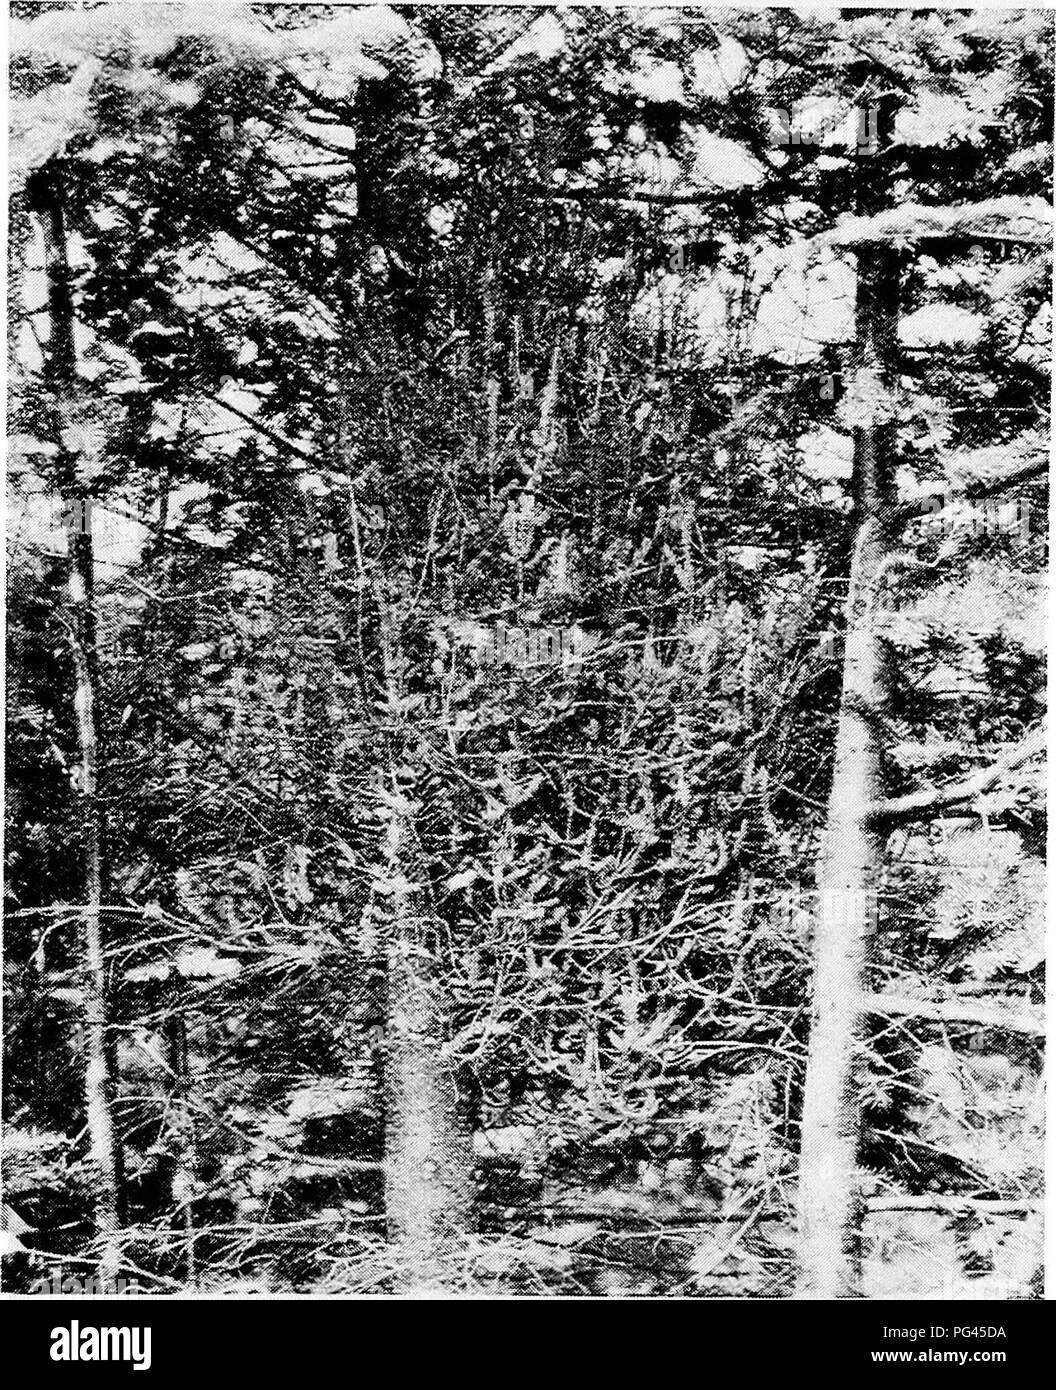 . Minnesota plant diseases. Plant diseases. Minnesota Plant Diseases. 53 ual, it is living parasitically on the remainder of the host plant. That the broom itself is not injured, but rather stimulated, in its growth is seen, by the production of such numerous and large-sized branches. But the ultimate effect upon the whole. Fig. 23.—Witches'-broom on balsam fir, caused by a rust fungus (Aecidium elatinuin). The branches of the broom are vertical instead of horizontal, as are the normal, un- diseased branches in the right of the picture. Original. plant is injurious because the normal balance o Stock Photo